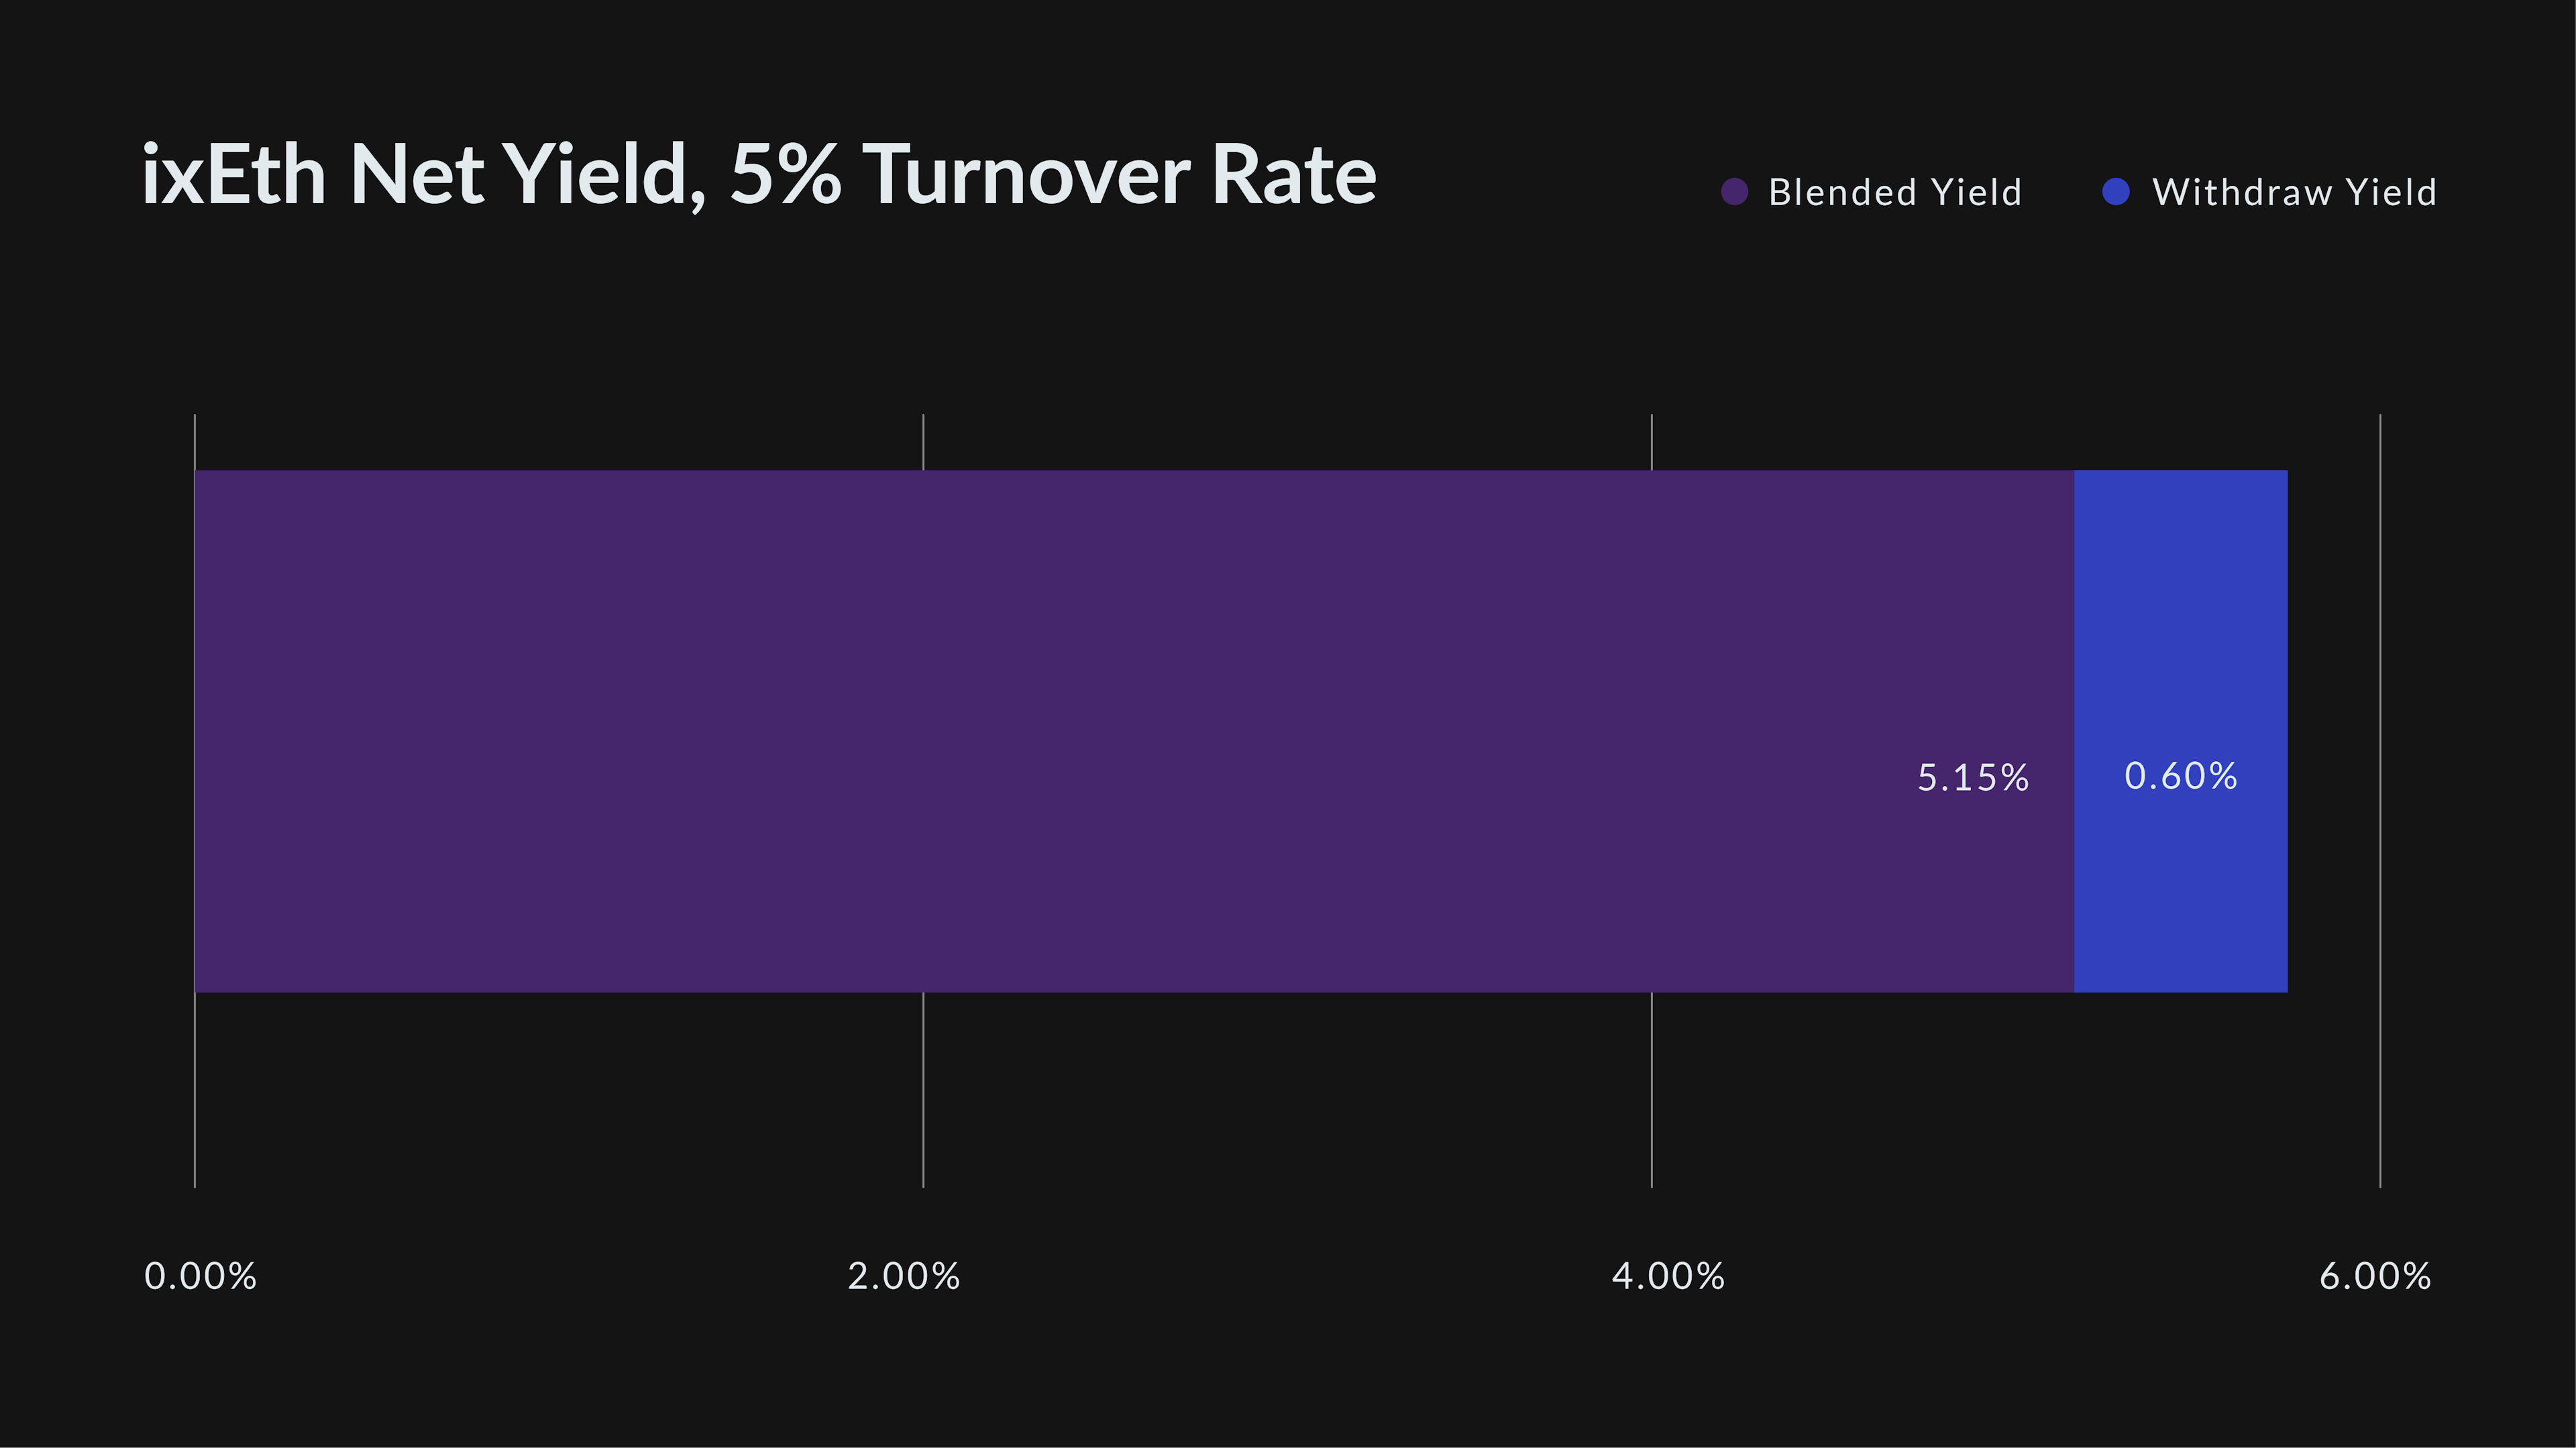 ixETH yield, assuming a 1% withdrawal fee and a 5% turnover rate